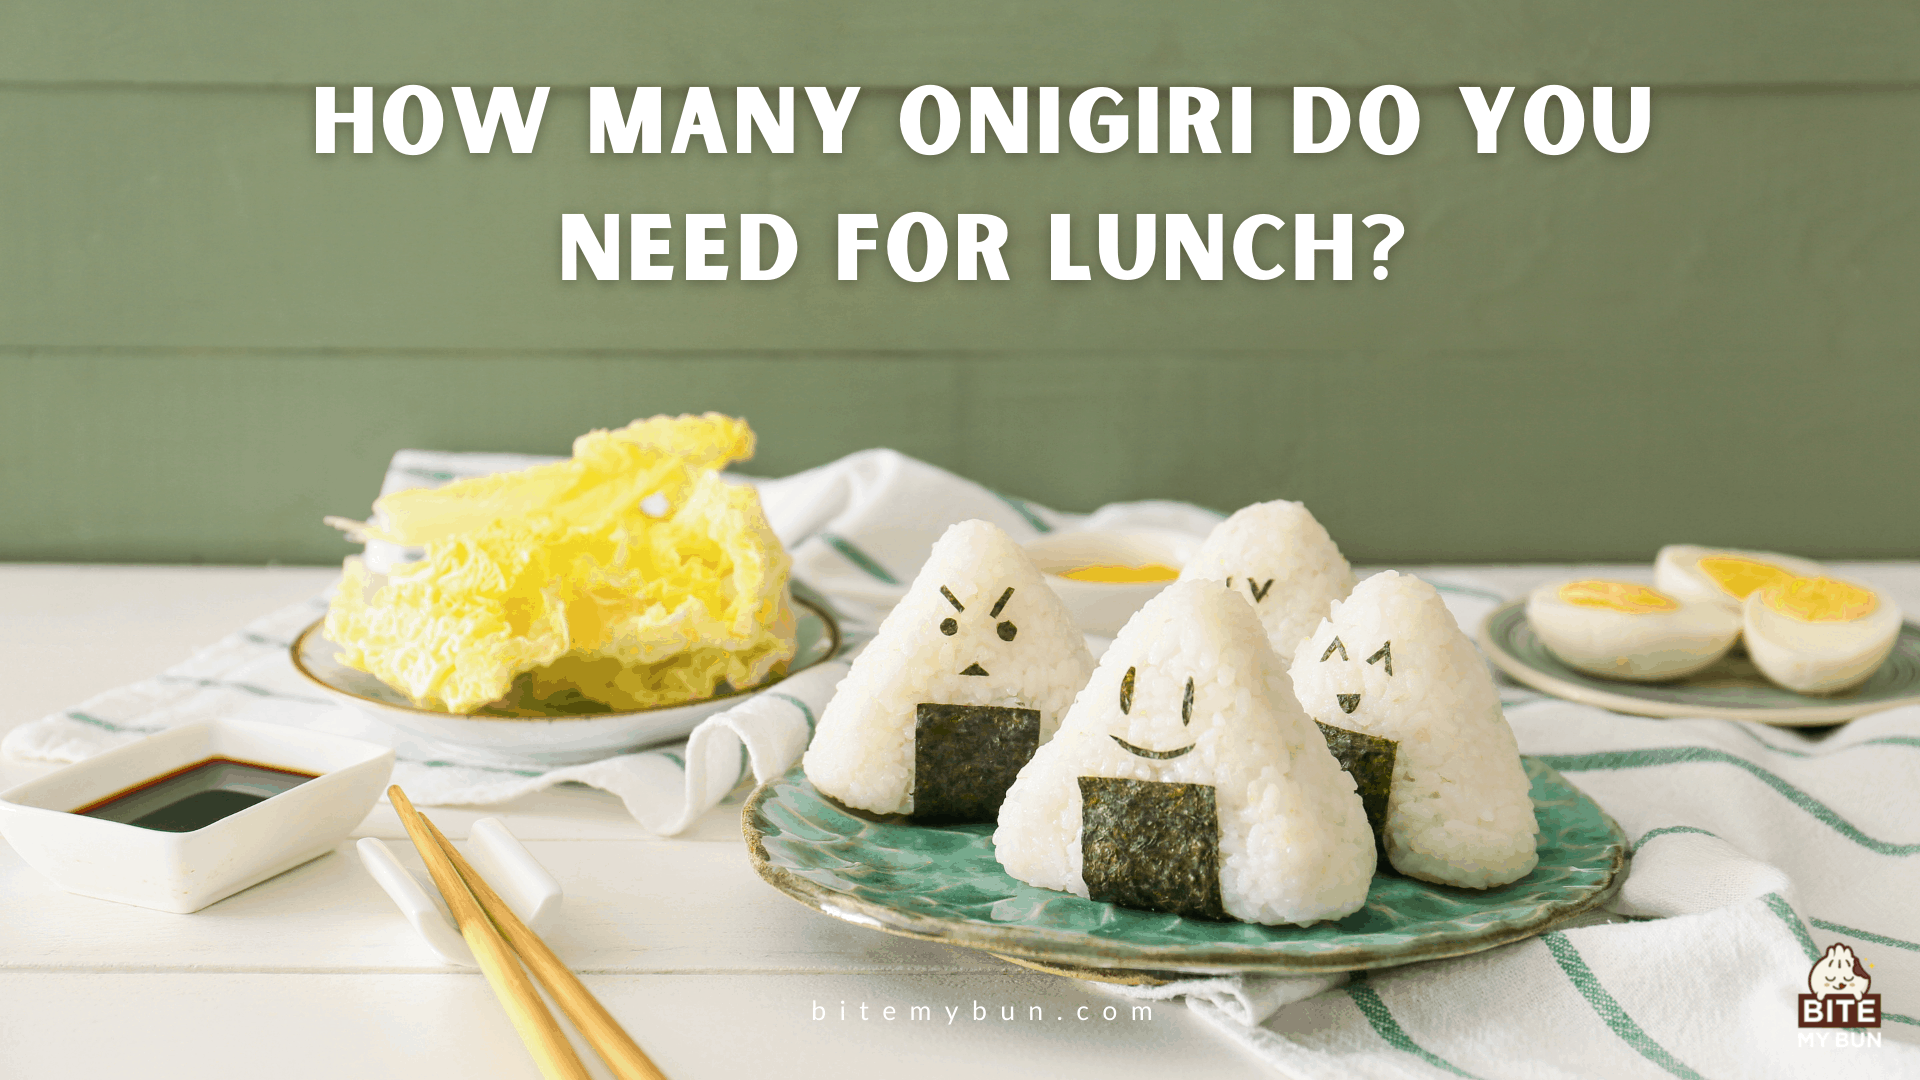 How many onigiri do you need for lunch? Make it a complete meal like this